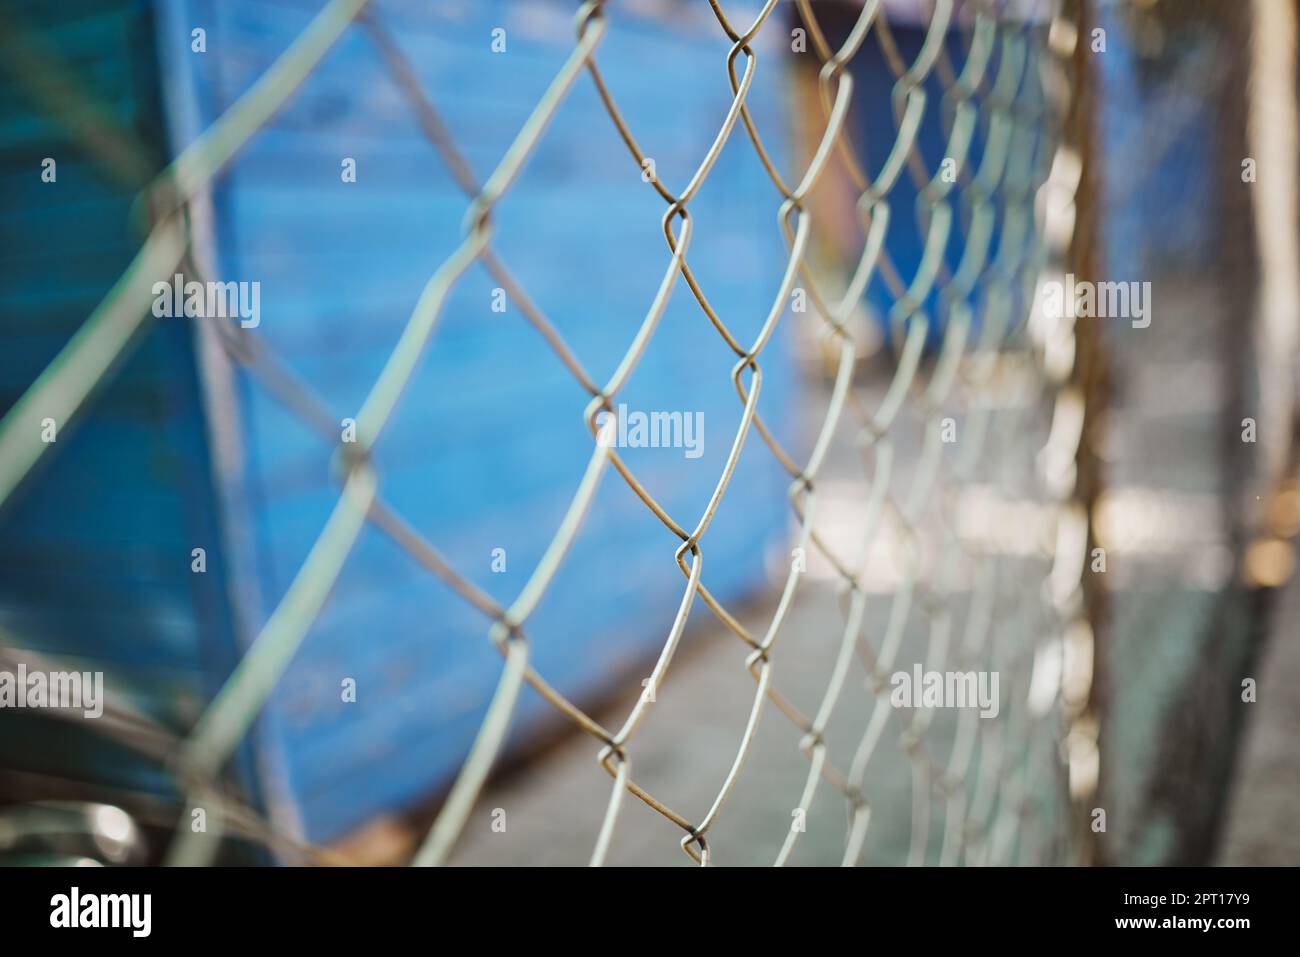 Steel, iron or metal fence for safety with a blurred background at an outdoor shelter or clinic. Chain link, veterinary and closeup of a wire barrier Stock Photo